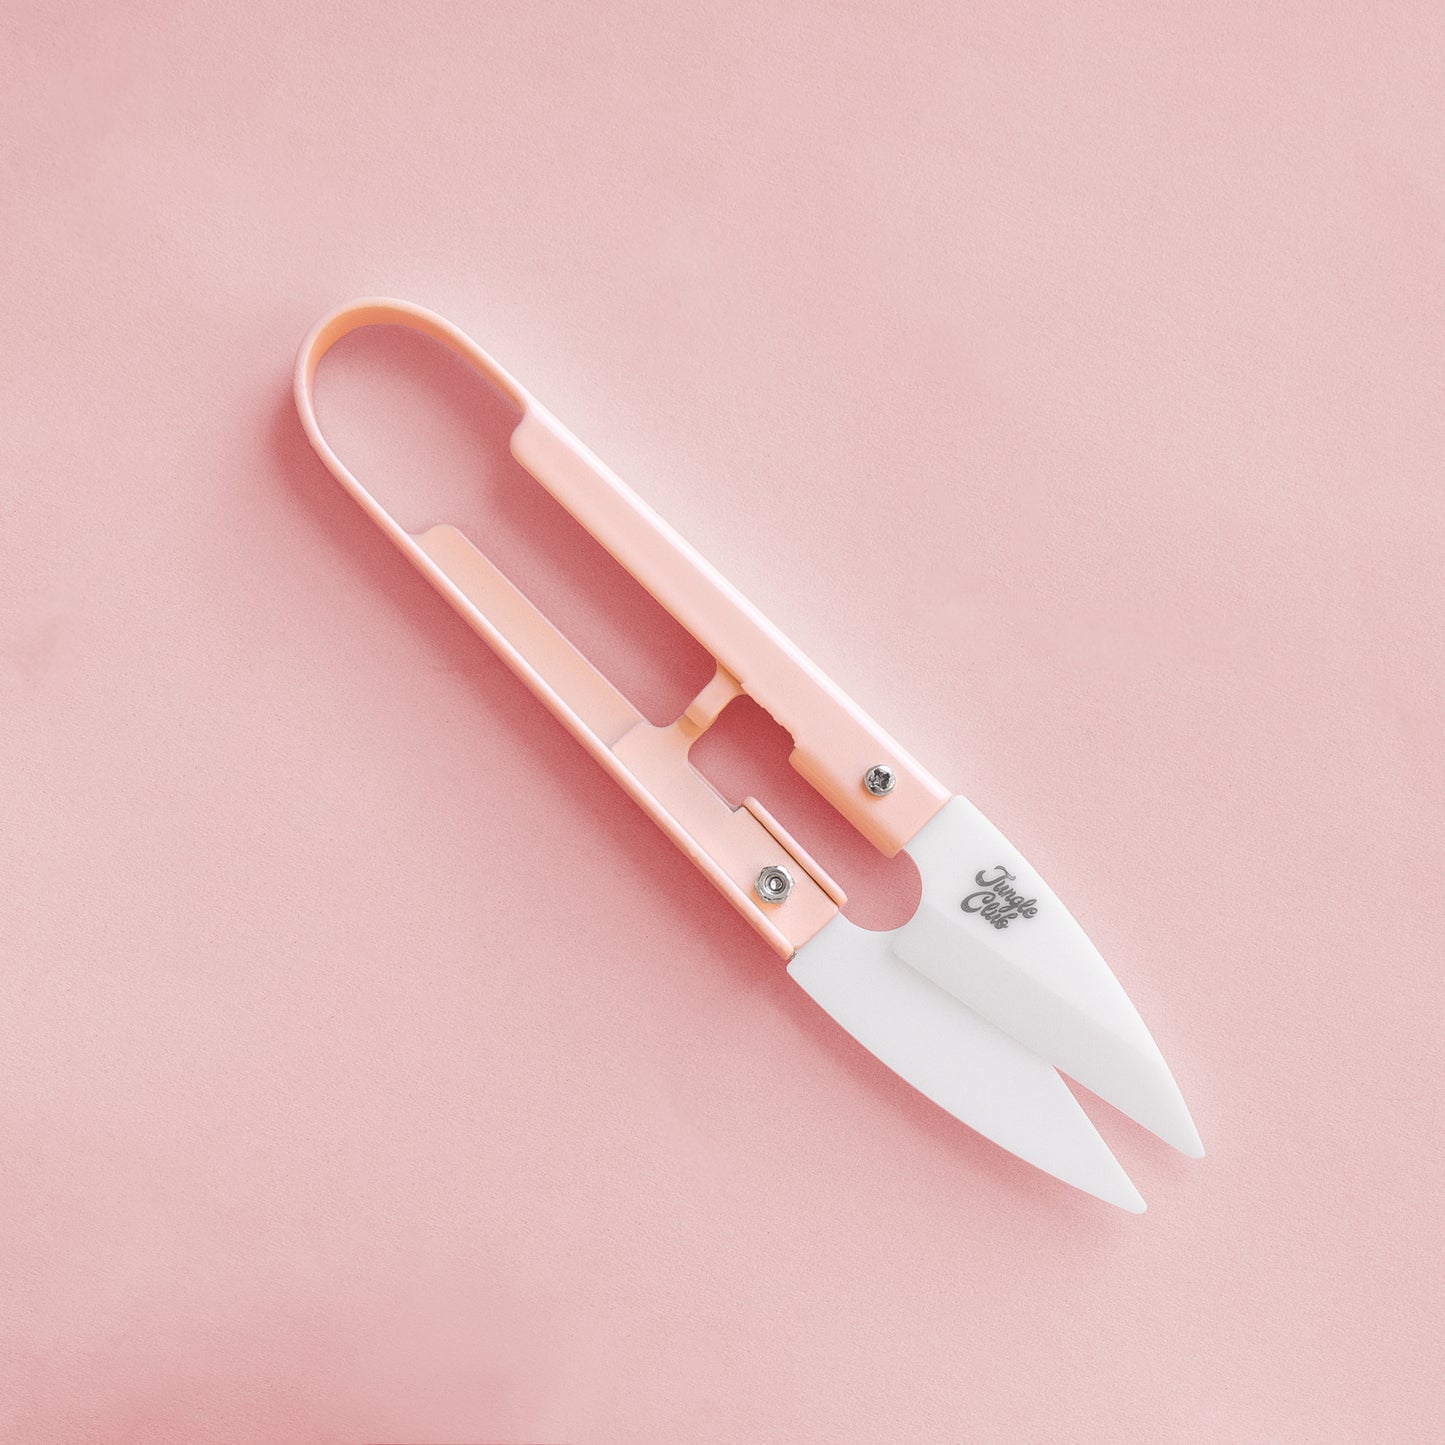 On a pink background is a pair of pink mini plant shears with small text on the clippers that reads, "Jungle Club".